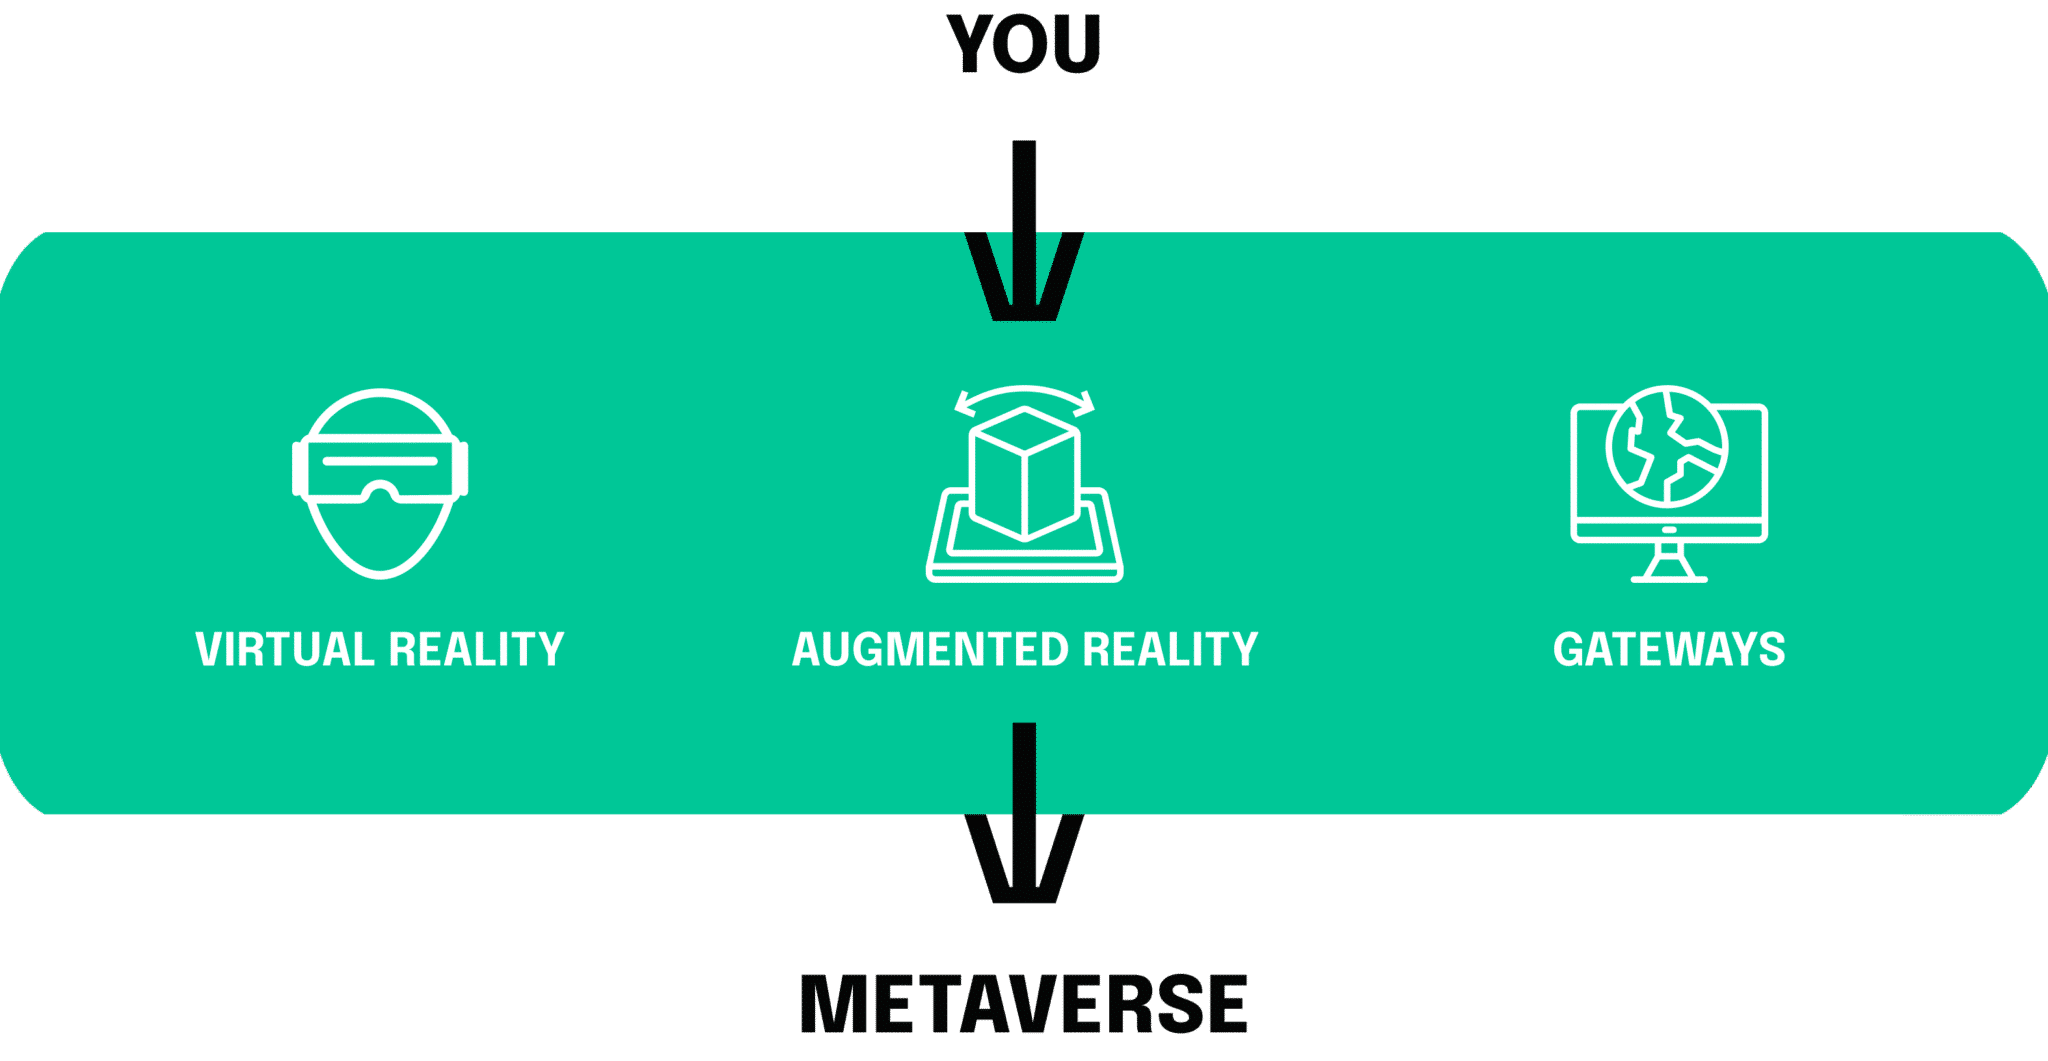 You need to consider VR, AR and the different gateways to create a seamless integration of the metaverse into our normal lives.